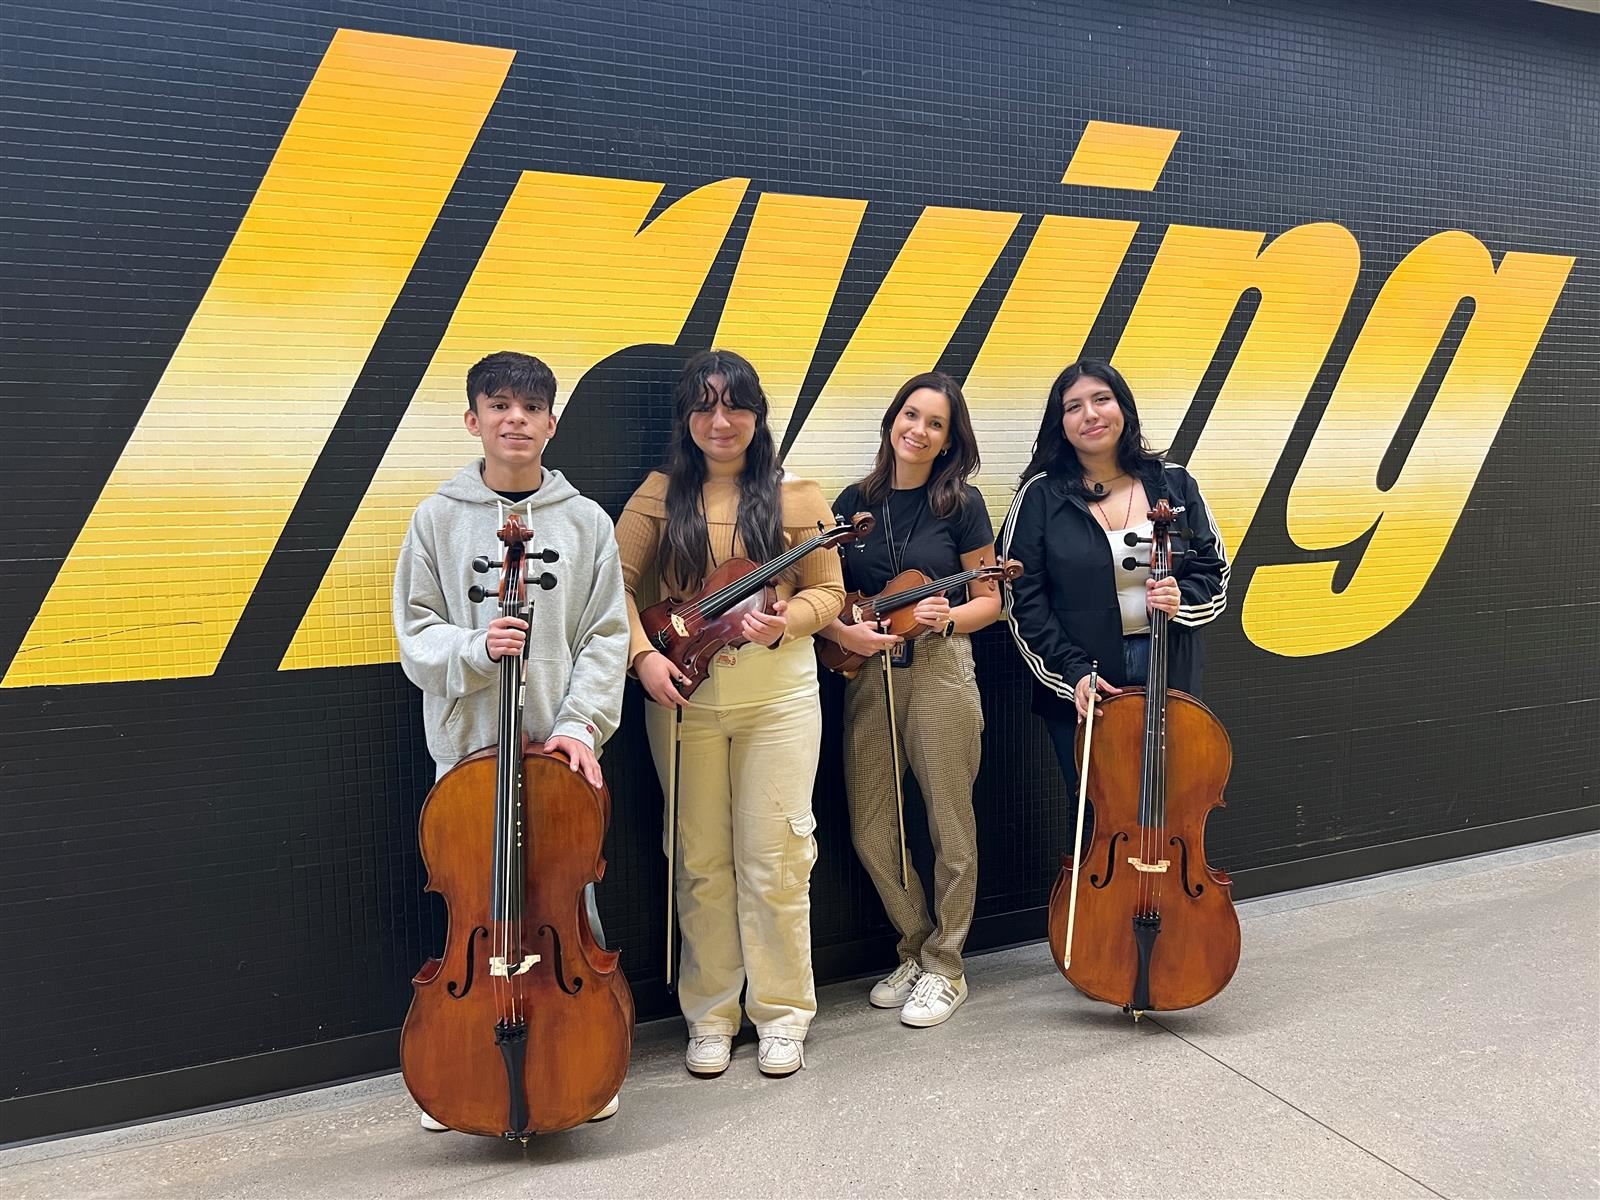  From student to conductor: Irving ISD alumnus leads Irving High School’s exceptional orchestra prog